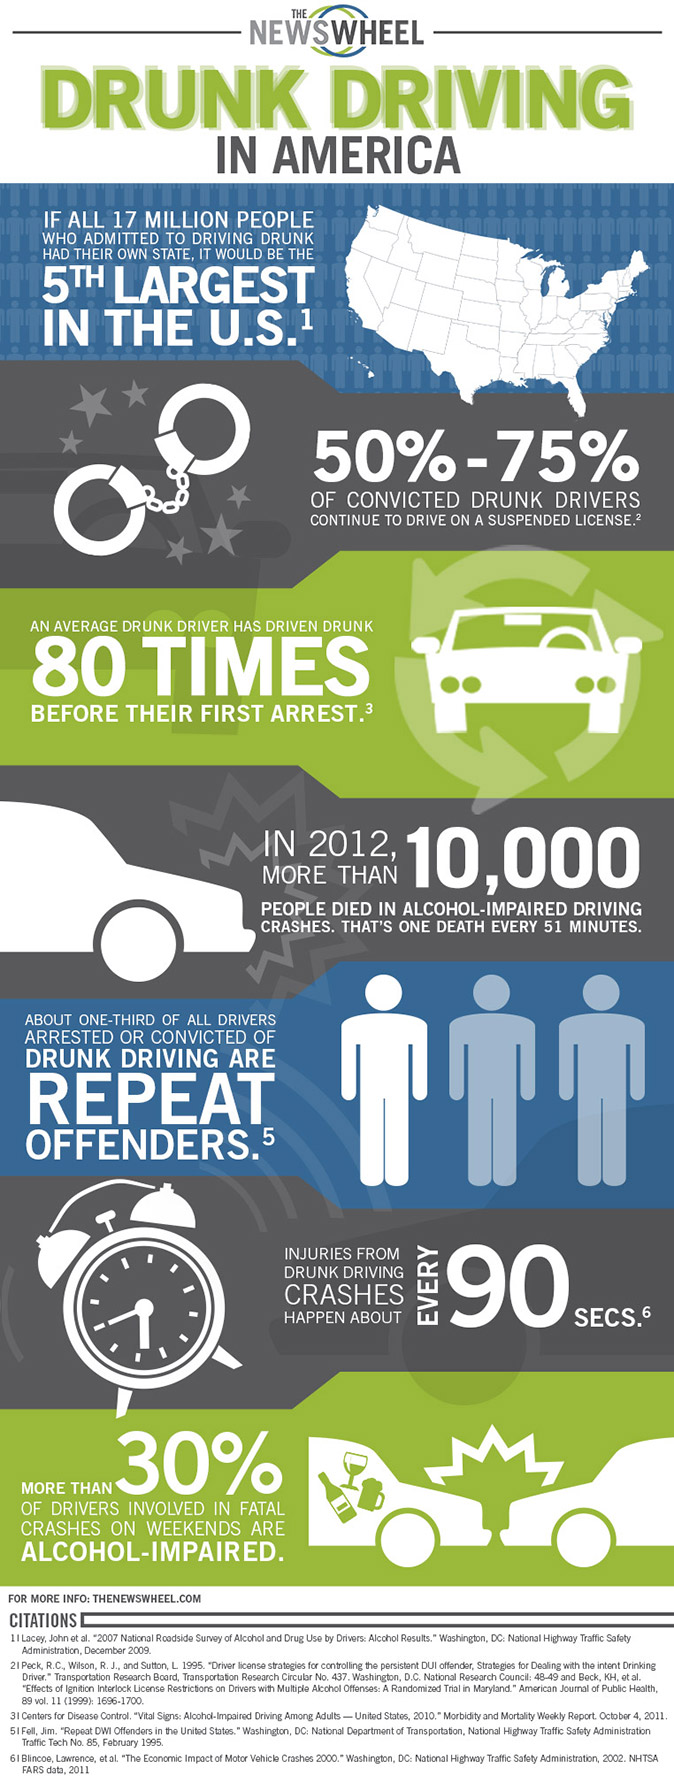 drunk driving in america infographic